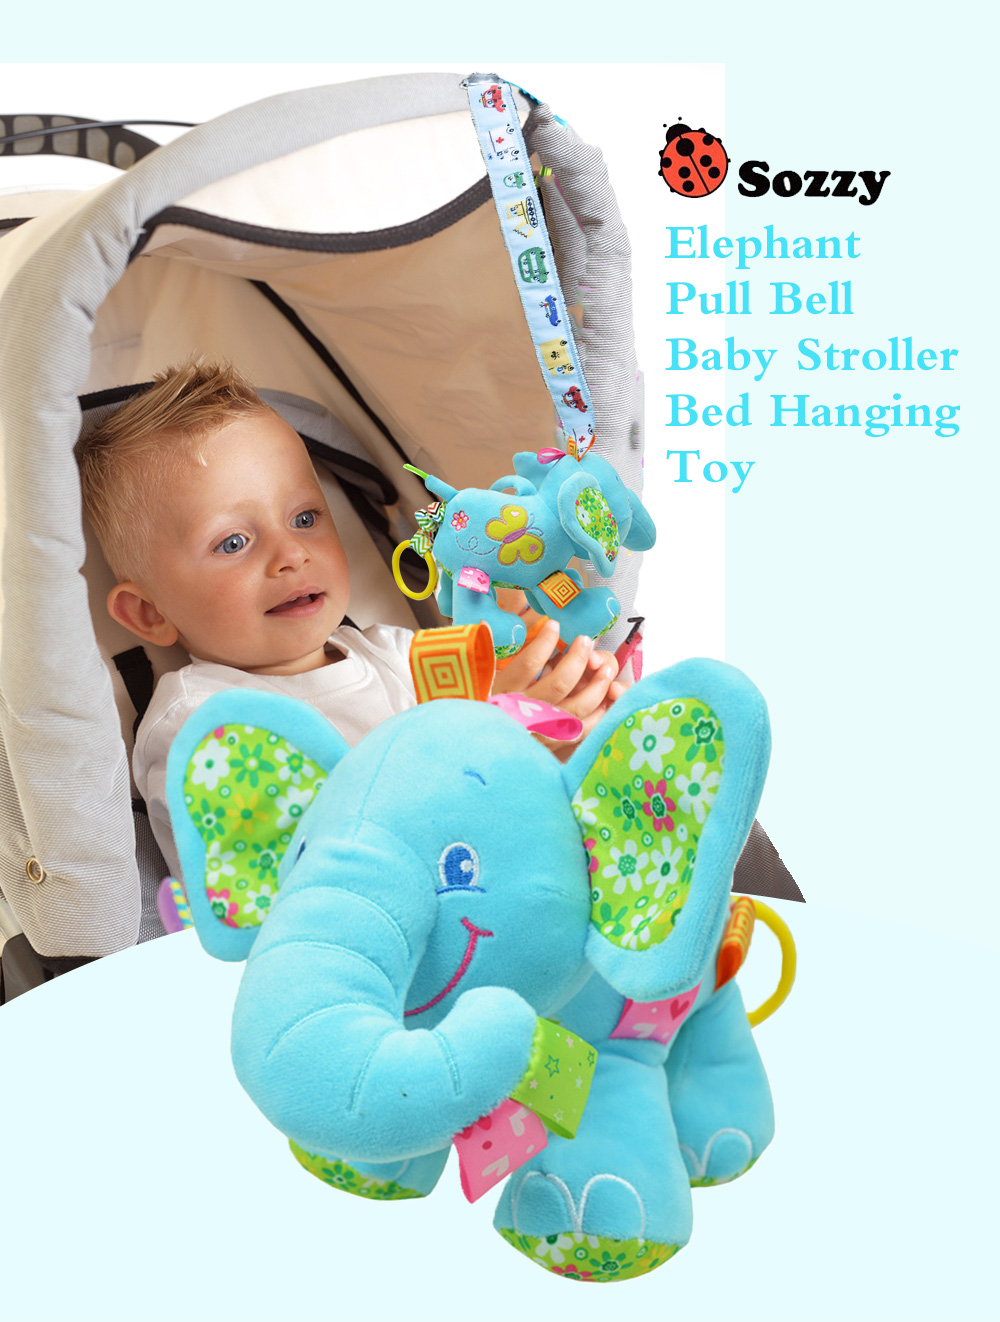 SOZZY Music Pull Bell Baby Stroller Bed Elephant Hanging Appease Toy